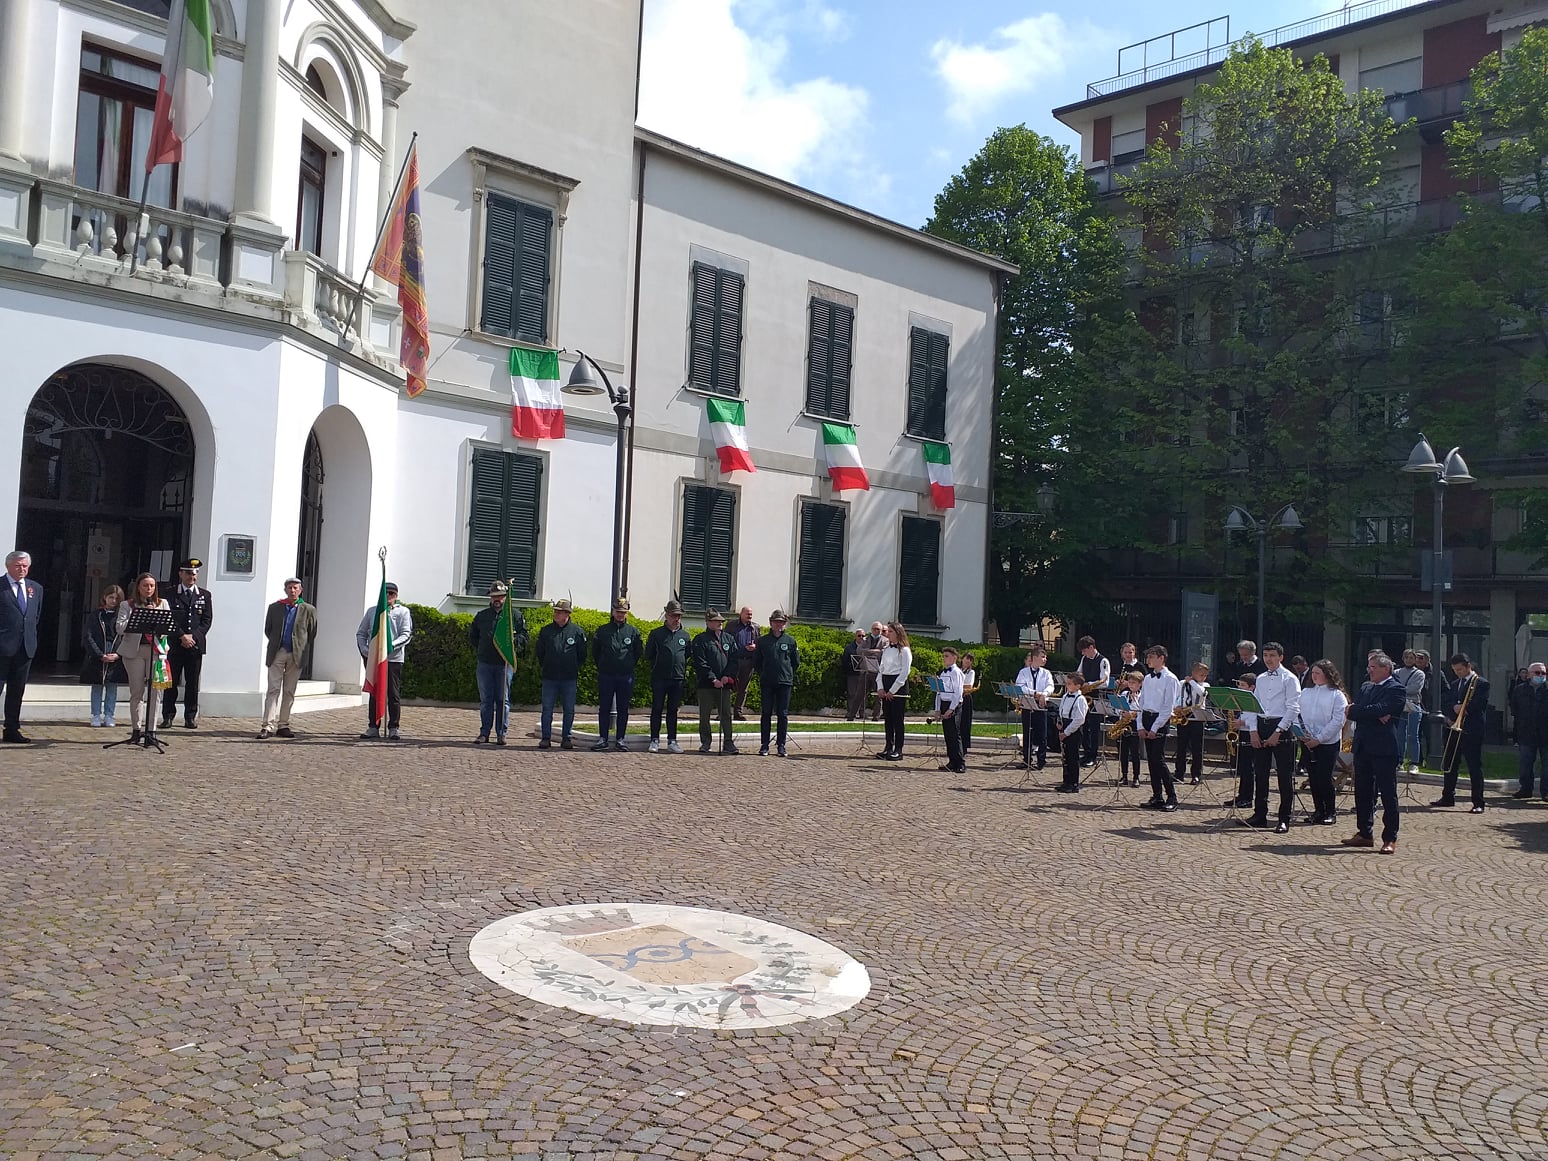 he Cultural Association "Harmony" participated in the National Holiday of Italy "April 25 Liberation Day" with the Fanfare Orchestra of Moldovan and Romanian children "Harmony" from the city of Spinea Venice.